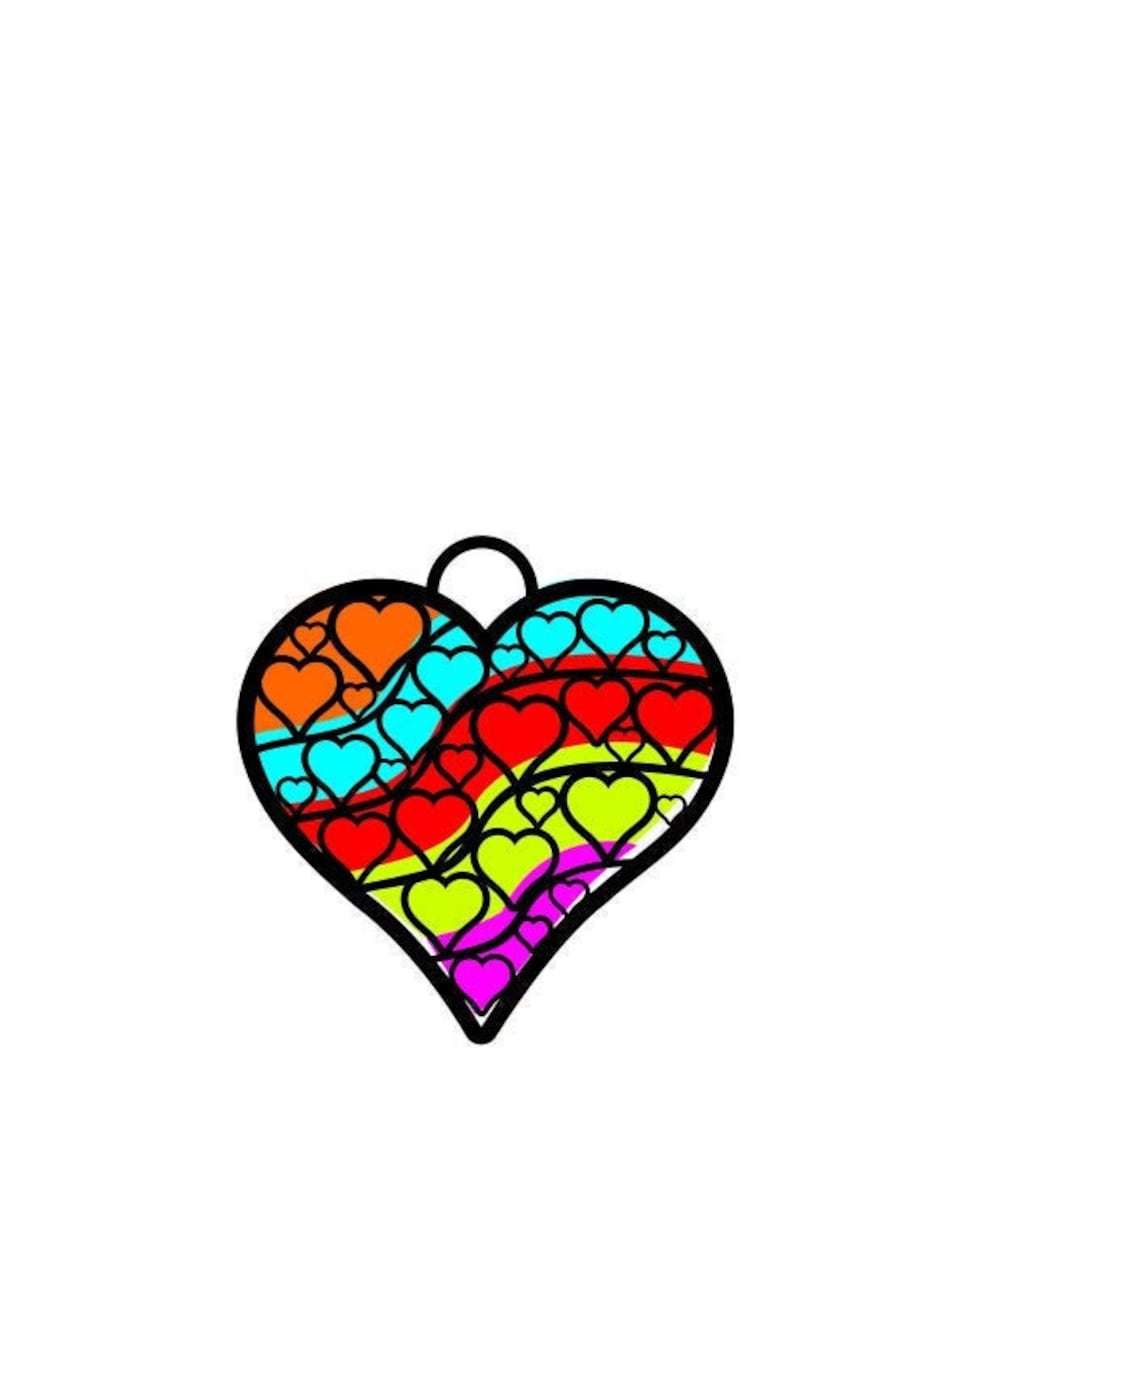 Rainbow heart svg cutting file for digital download | Etsy